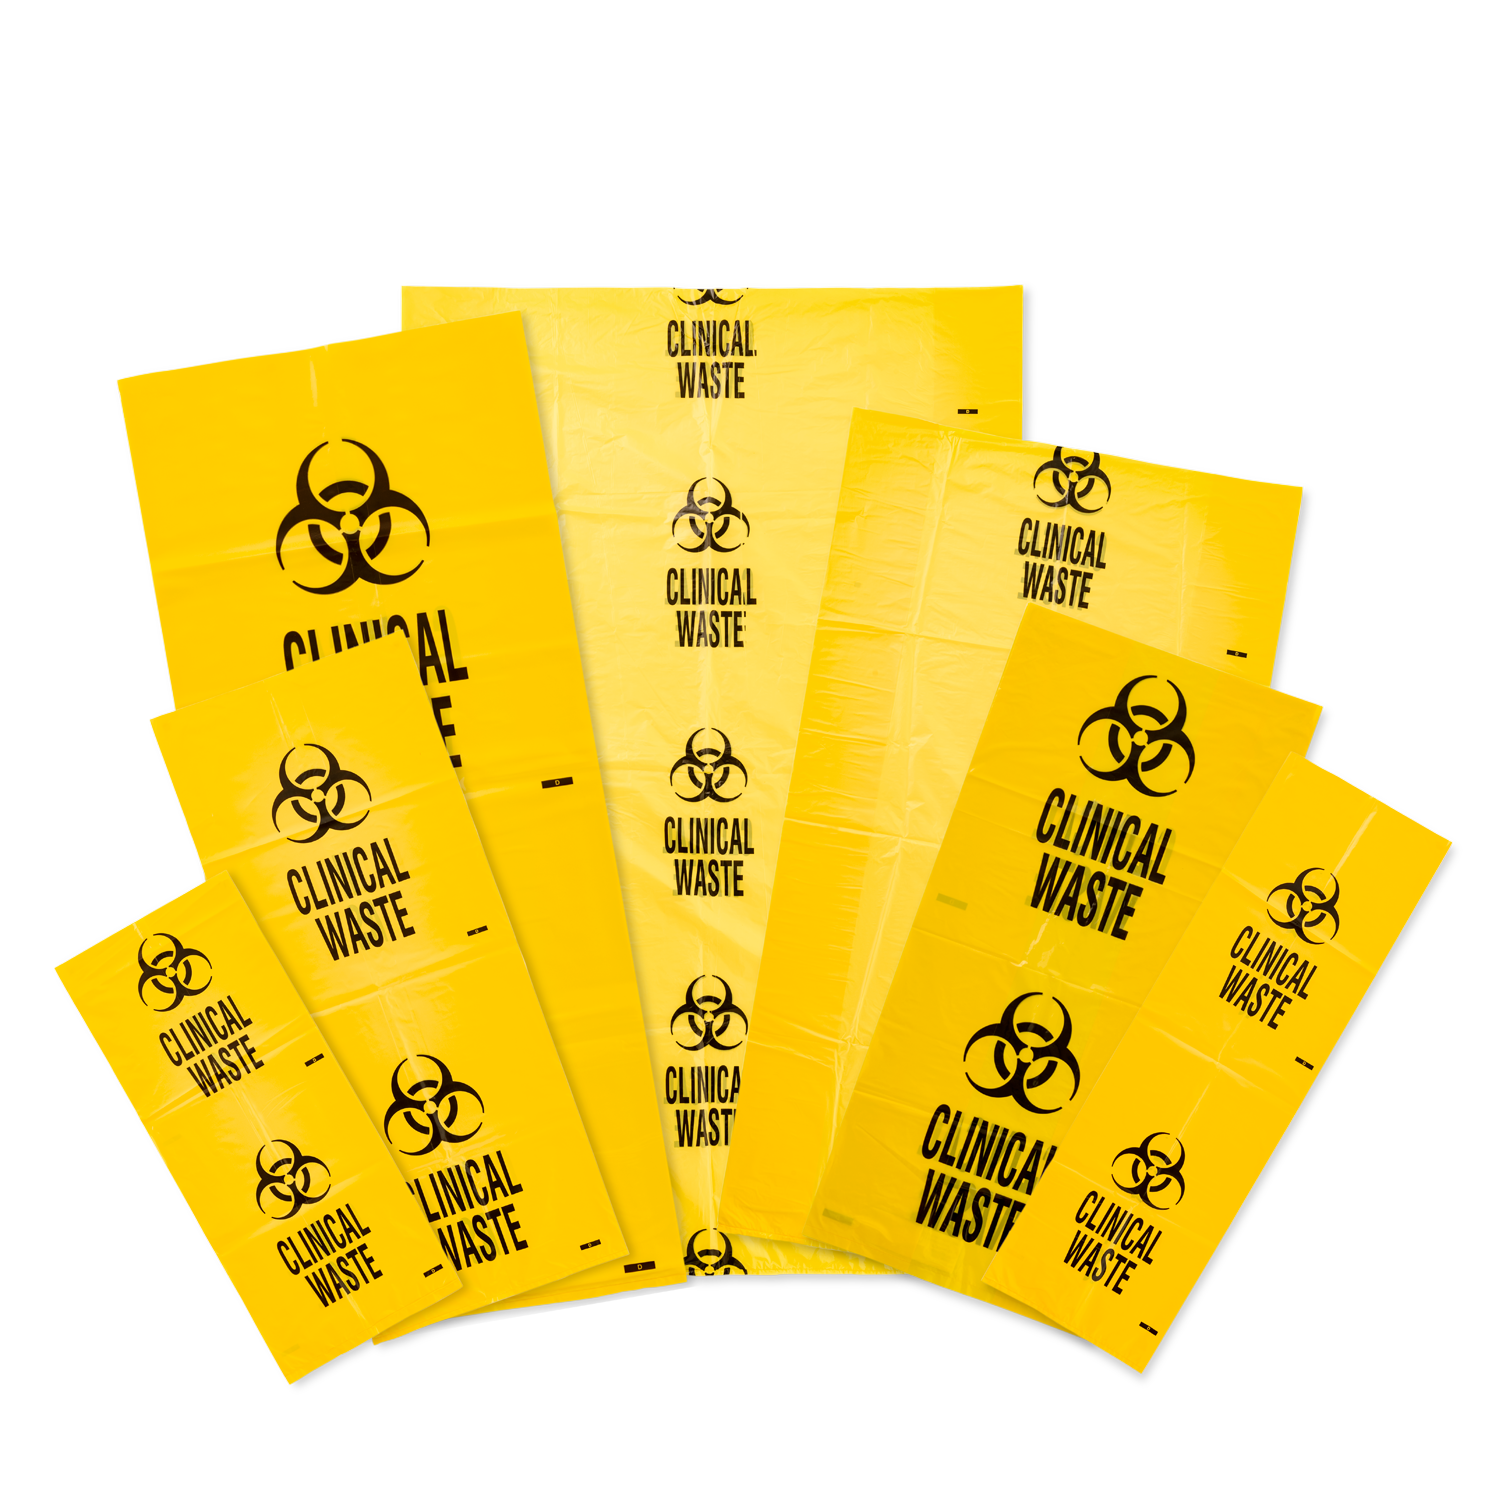 YELLOW WASTE BAG PRINTED CLINICAL WASTE WITH HAZARD SYMBOL